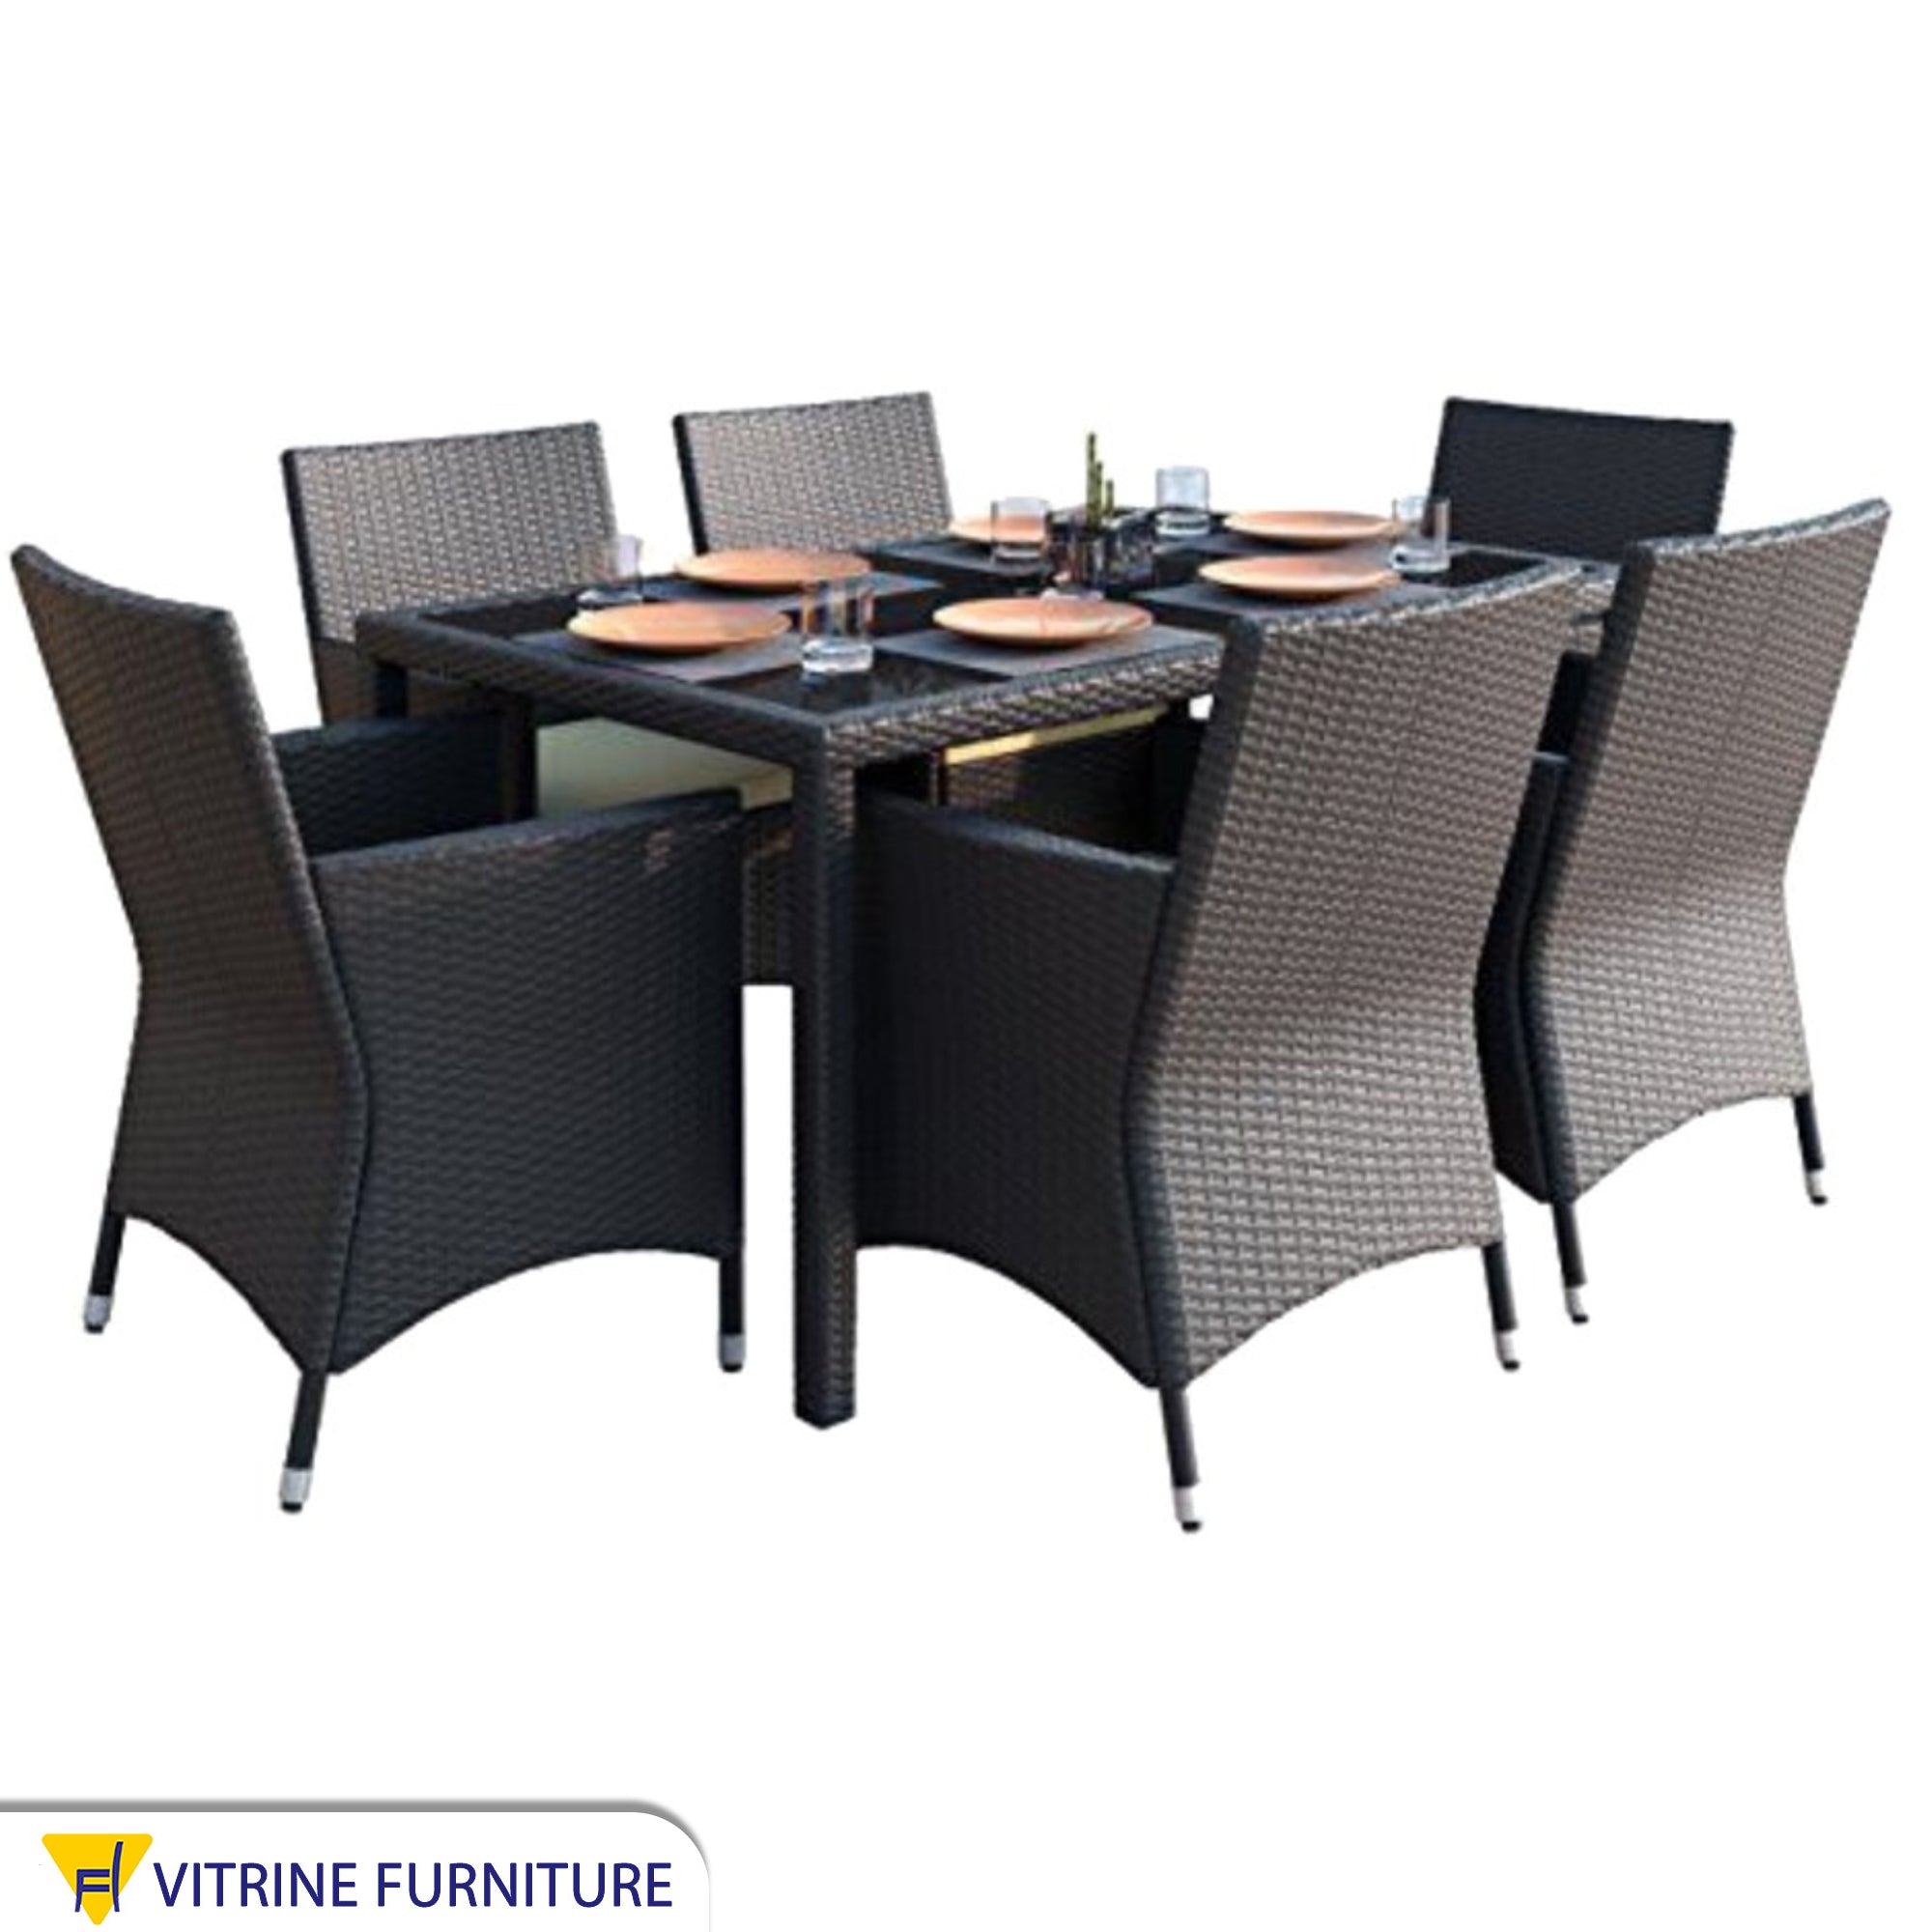 Rattan dining set with table and six chairs